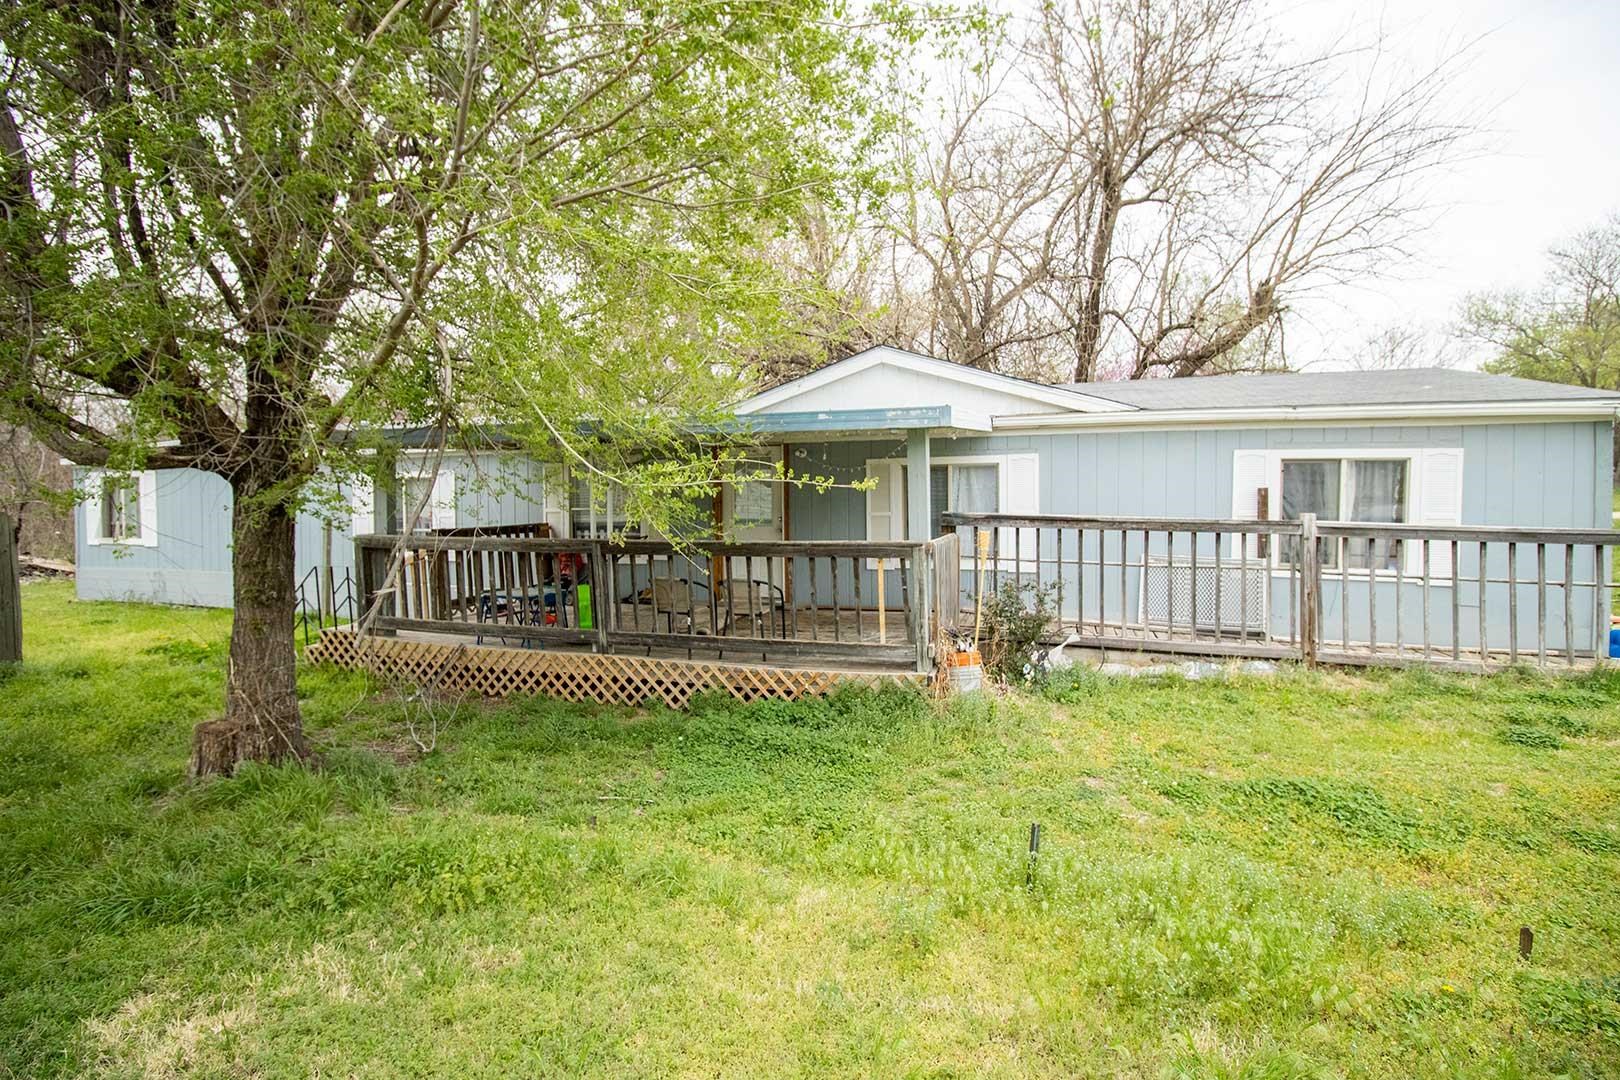 3-bedroom, 2-bathroom home located in southeast Wichita with Derby schools! The exterior features a 